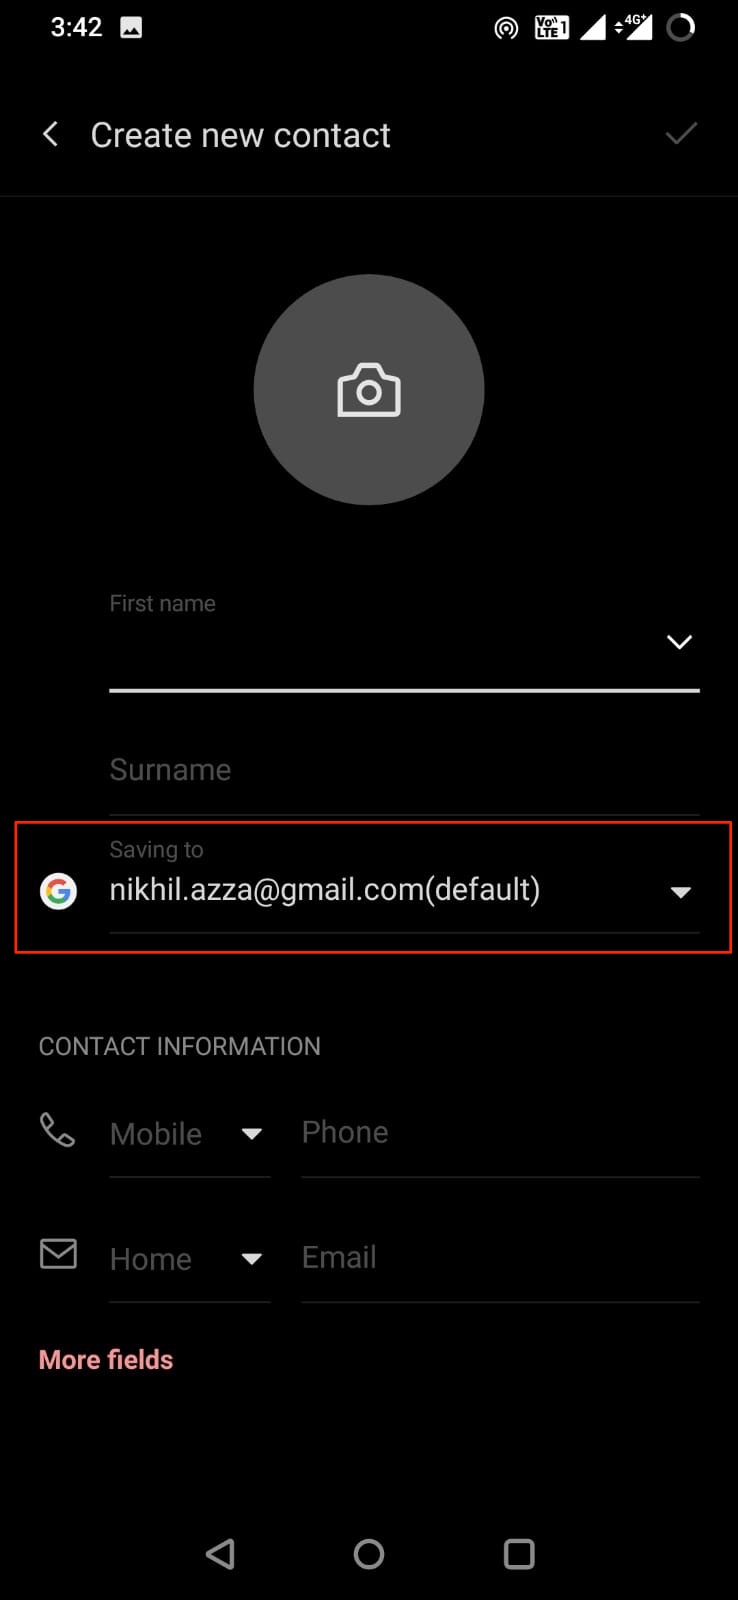 Save to Gmail Account